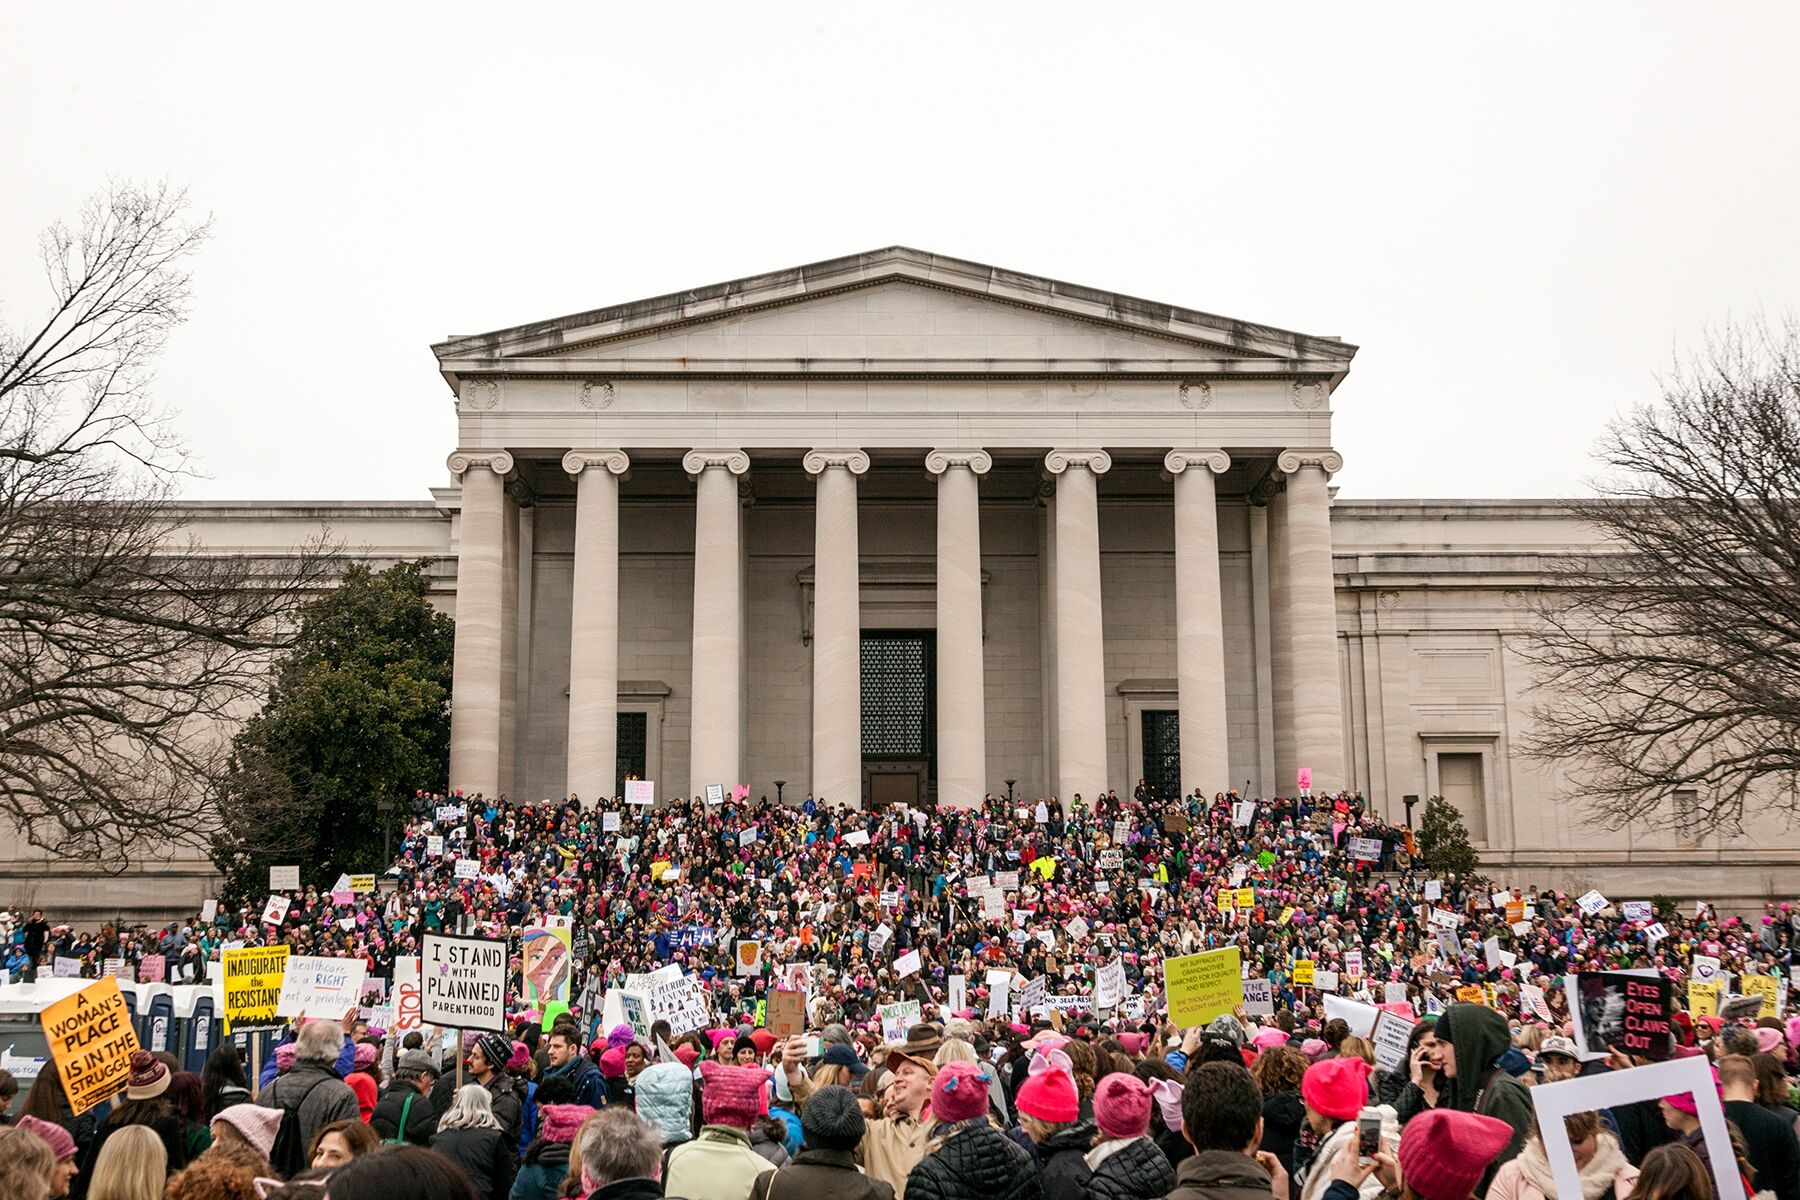 Demonstrators fill the steps of a columned building in Washington D.C. for the Womens March on Washington in 2017